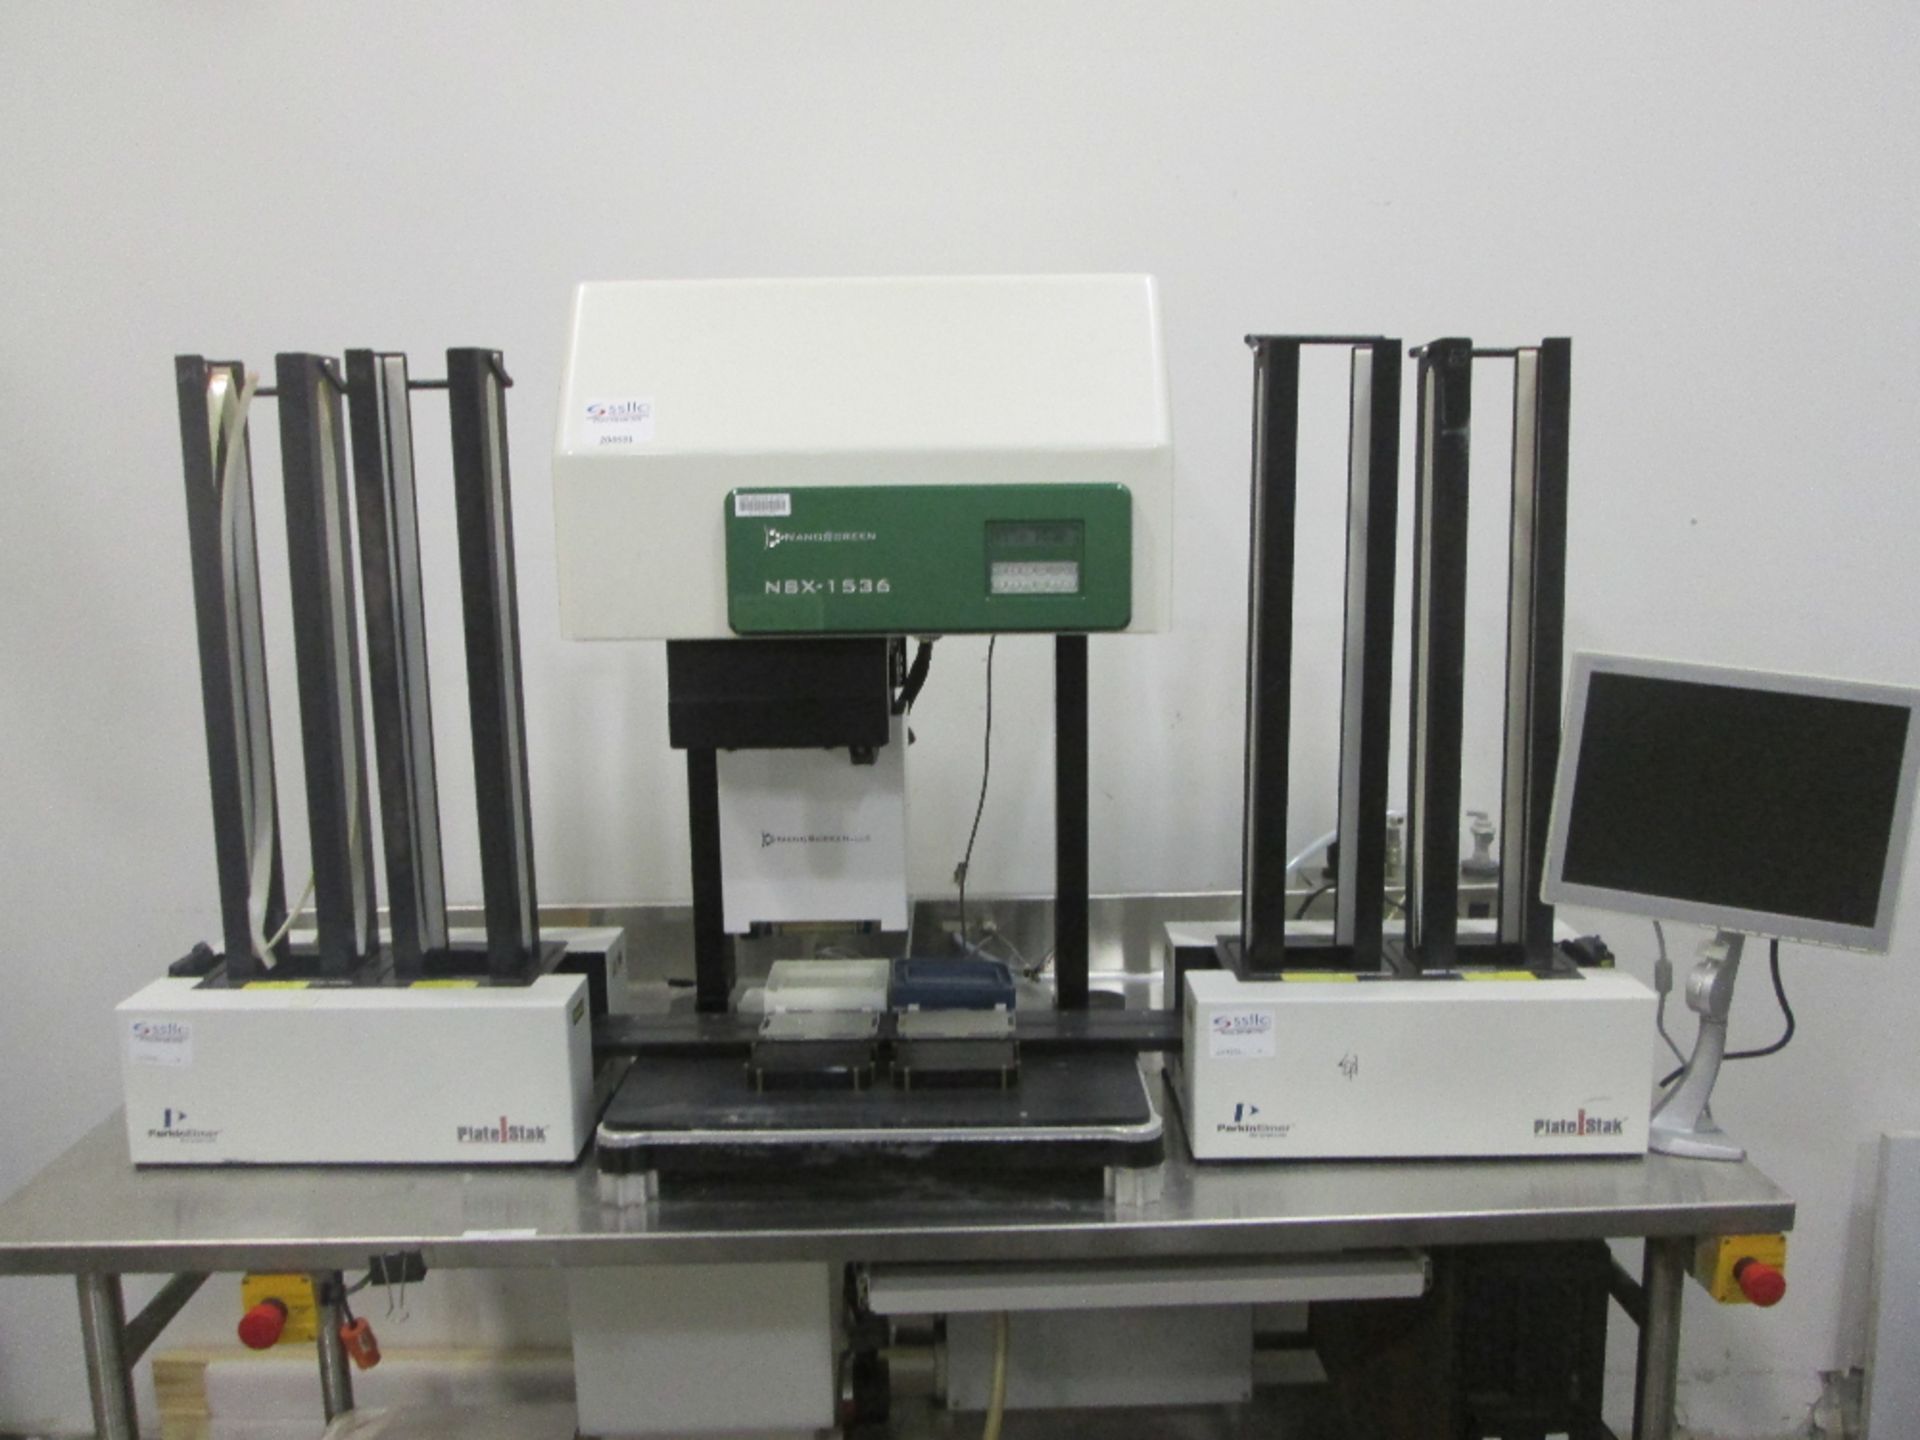 Beckman Coulter NanoScreen NSX-1536 Automated Pippetor